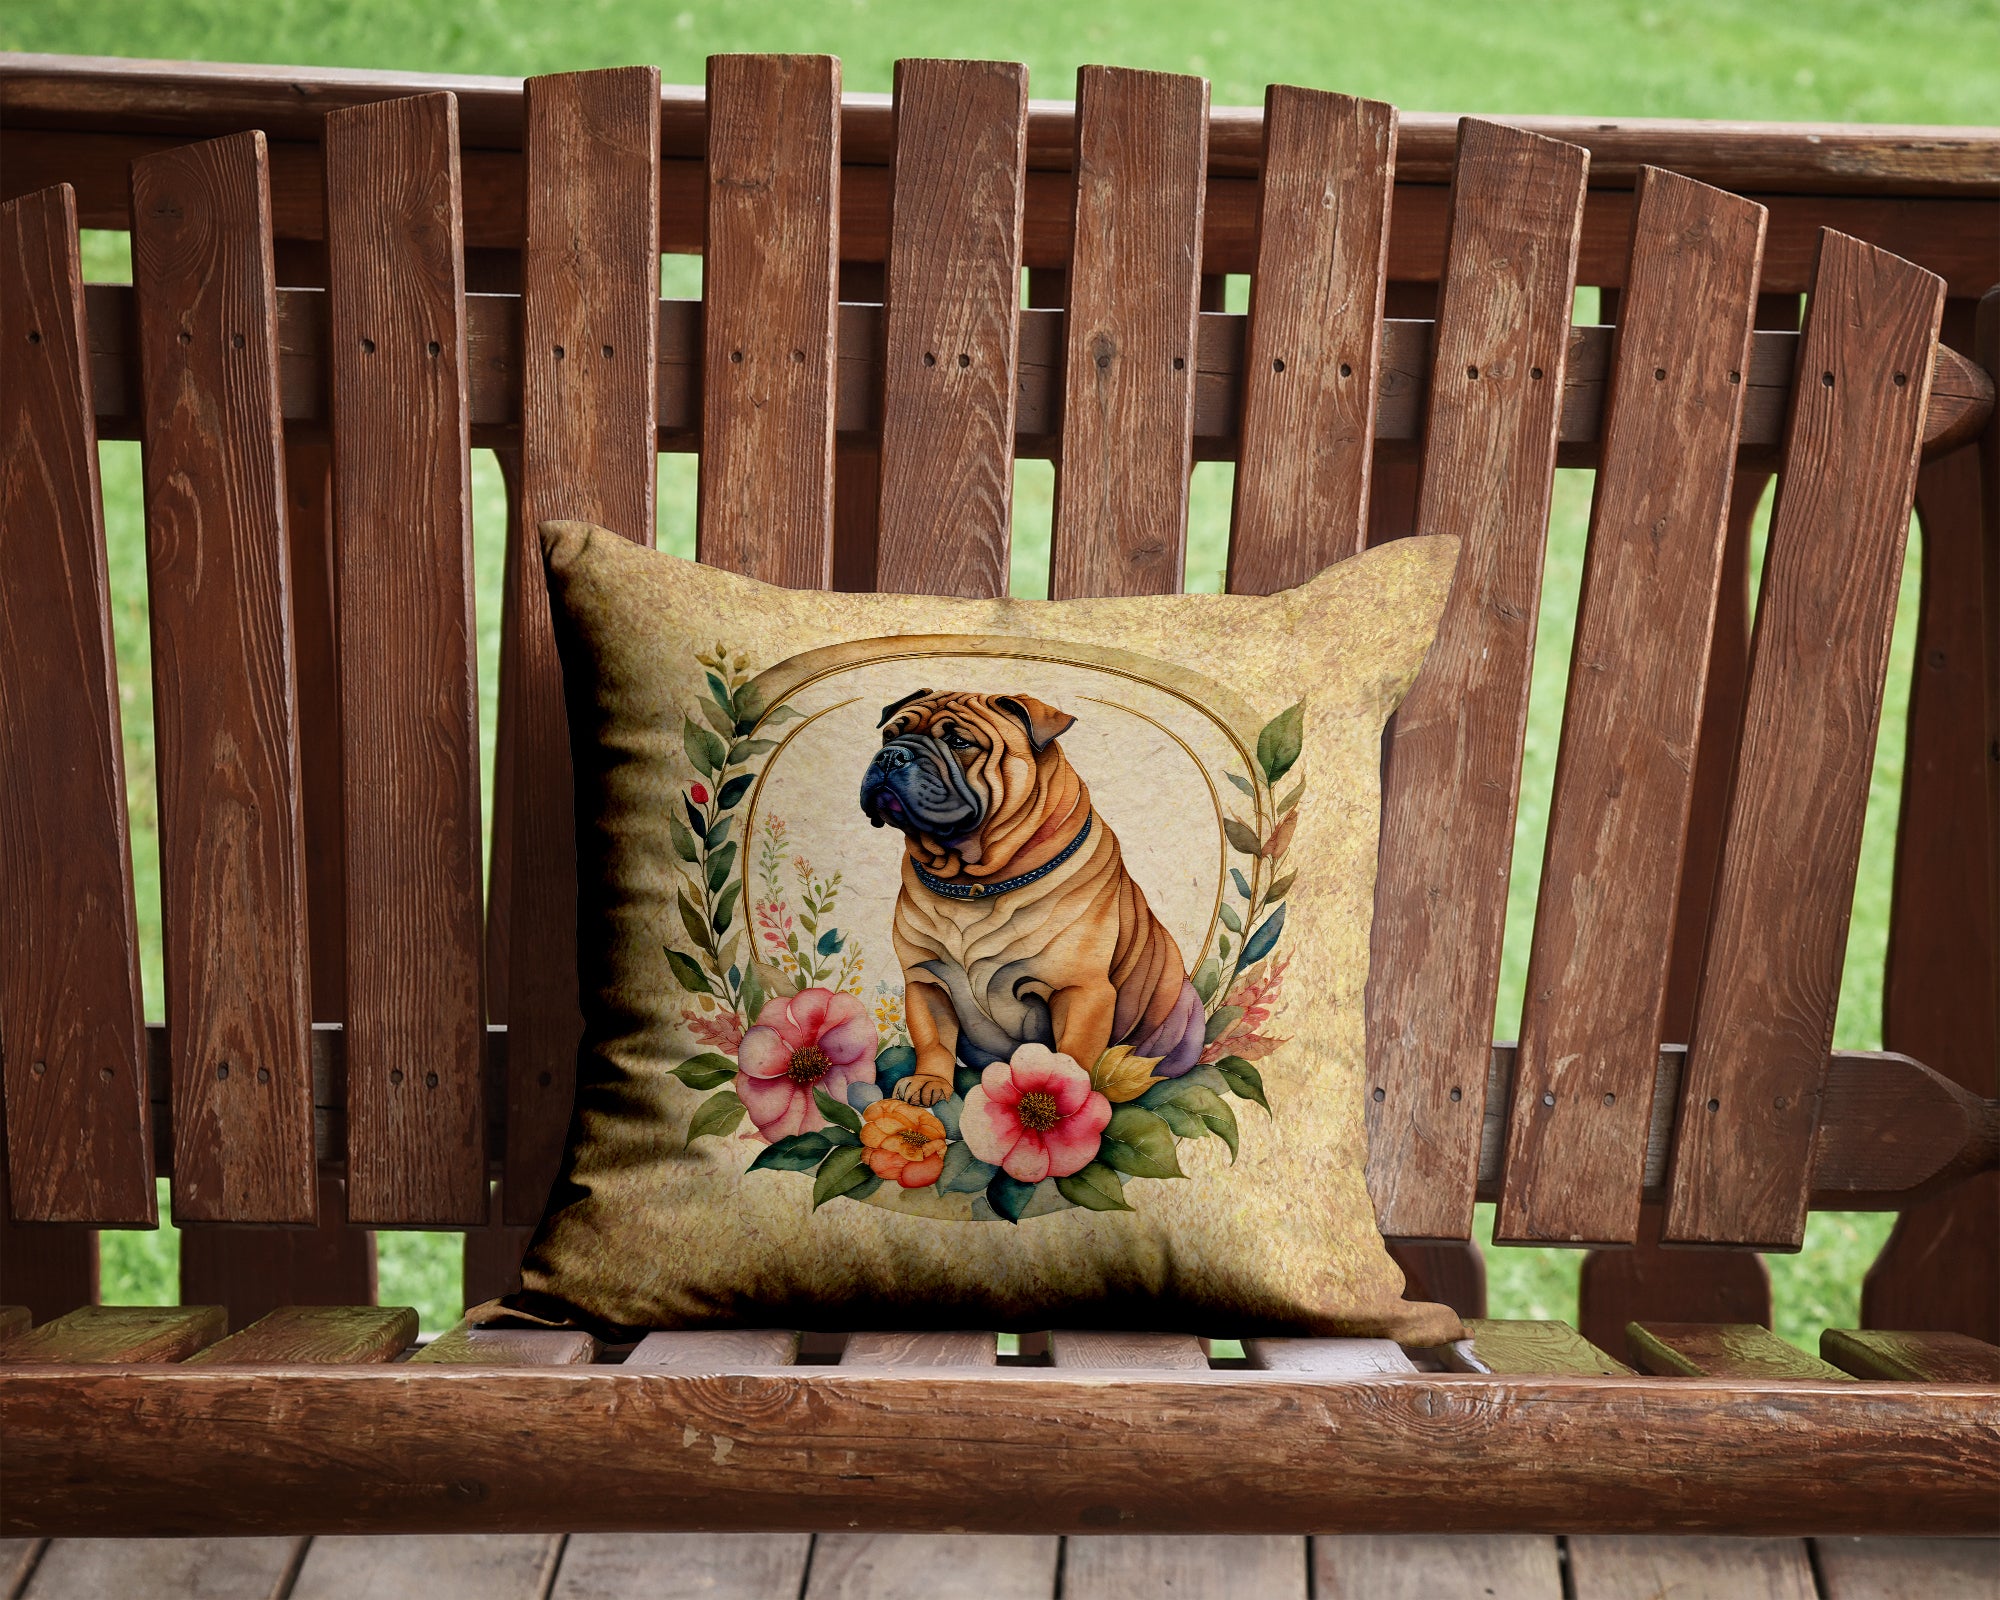 Shar Pei and Flowers Fabric Decorative Pillow